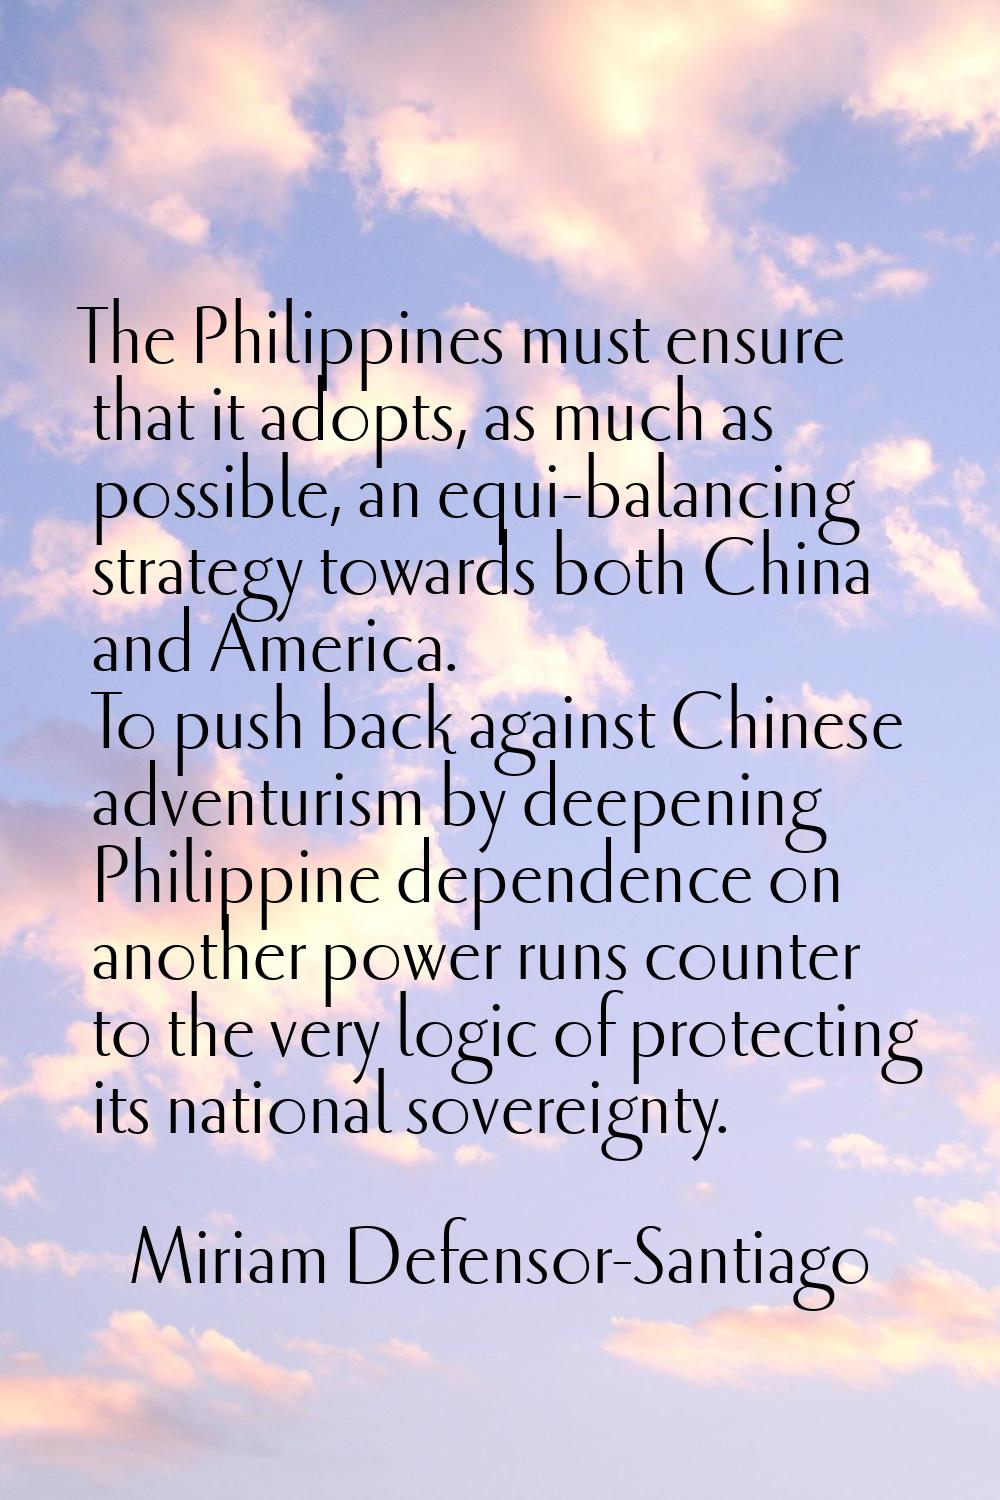 The Philippines must ensure that it adopts, as much as possible, an equi-balancing strategy towards